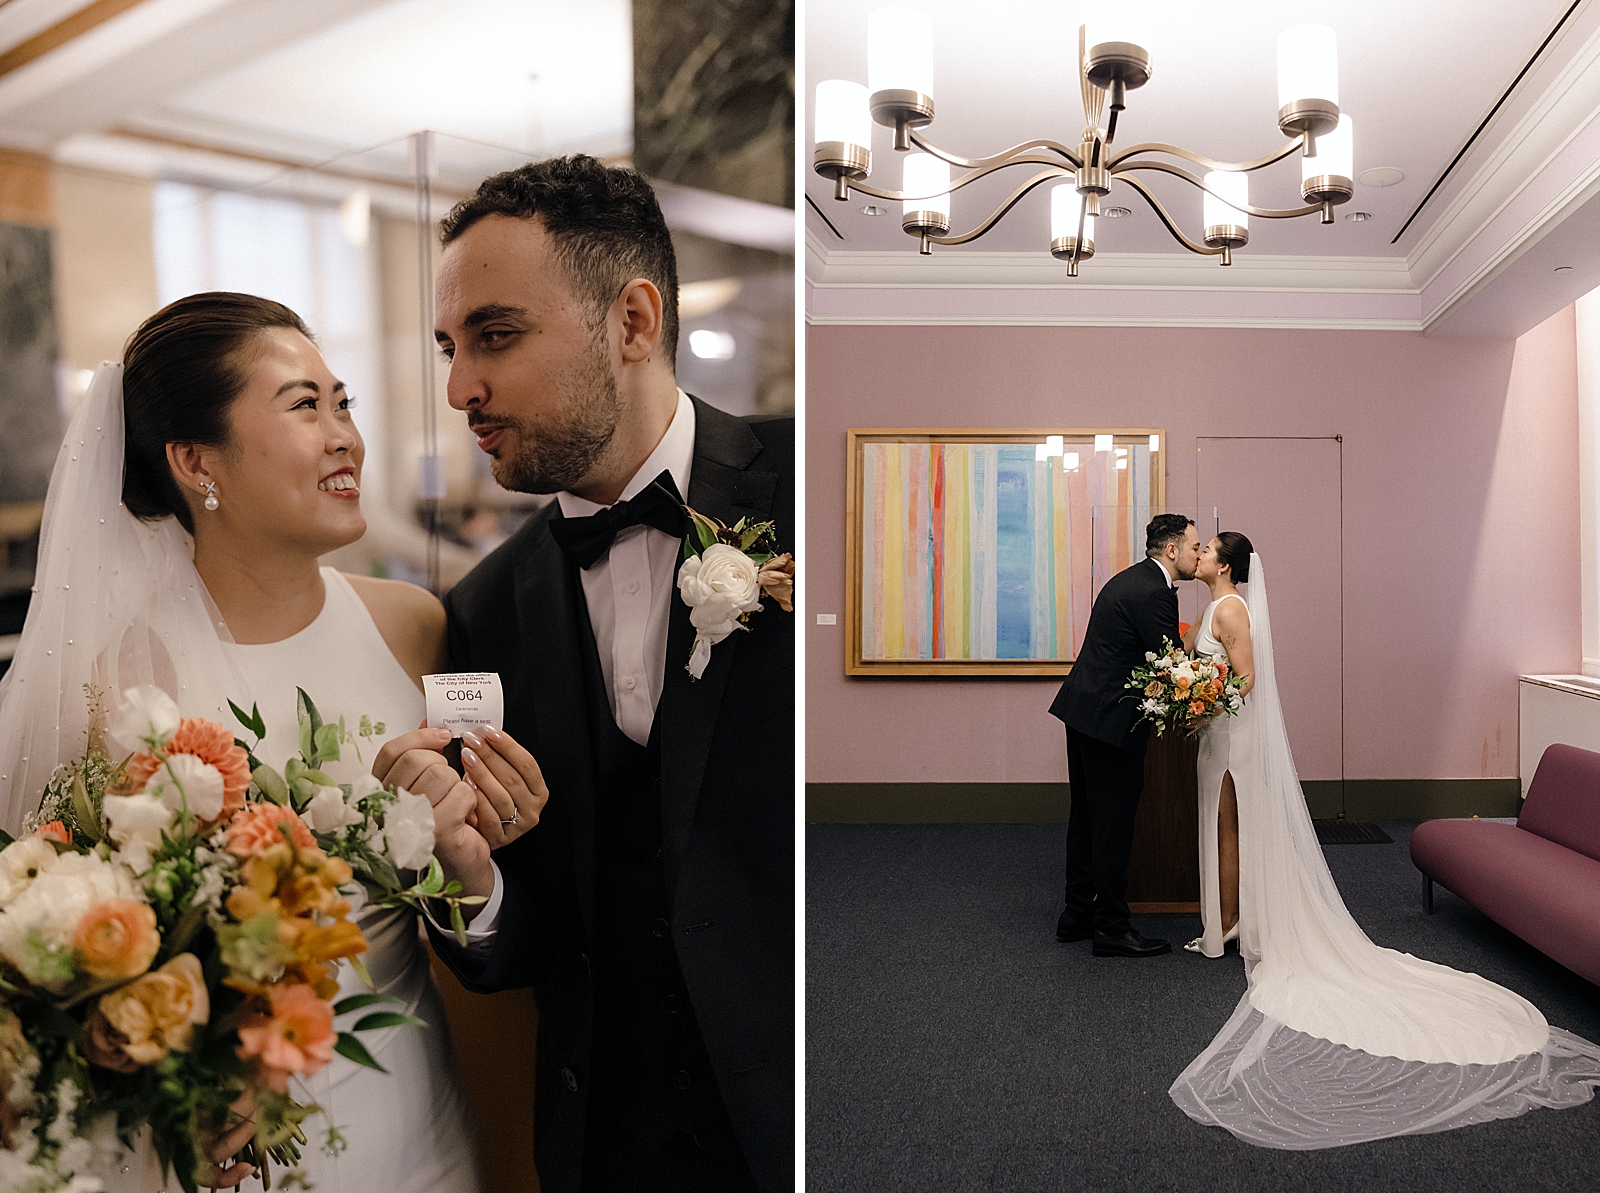 Left photo: Upper body shot of the bride and groom holding a sticker. 
Right photo: Full body shot of the bride and groom sharing a kiss.